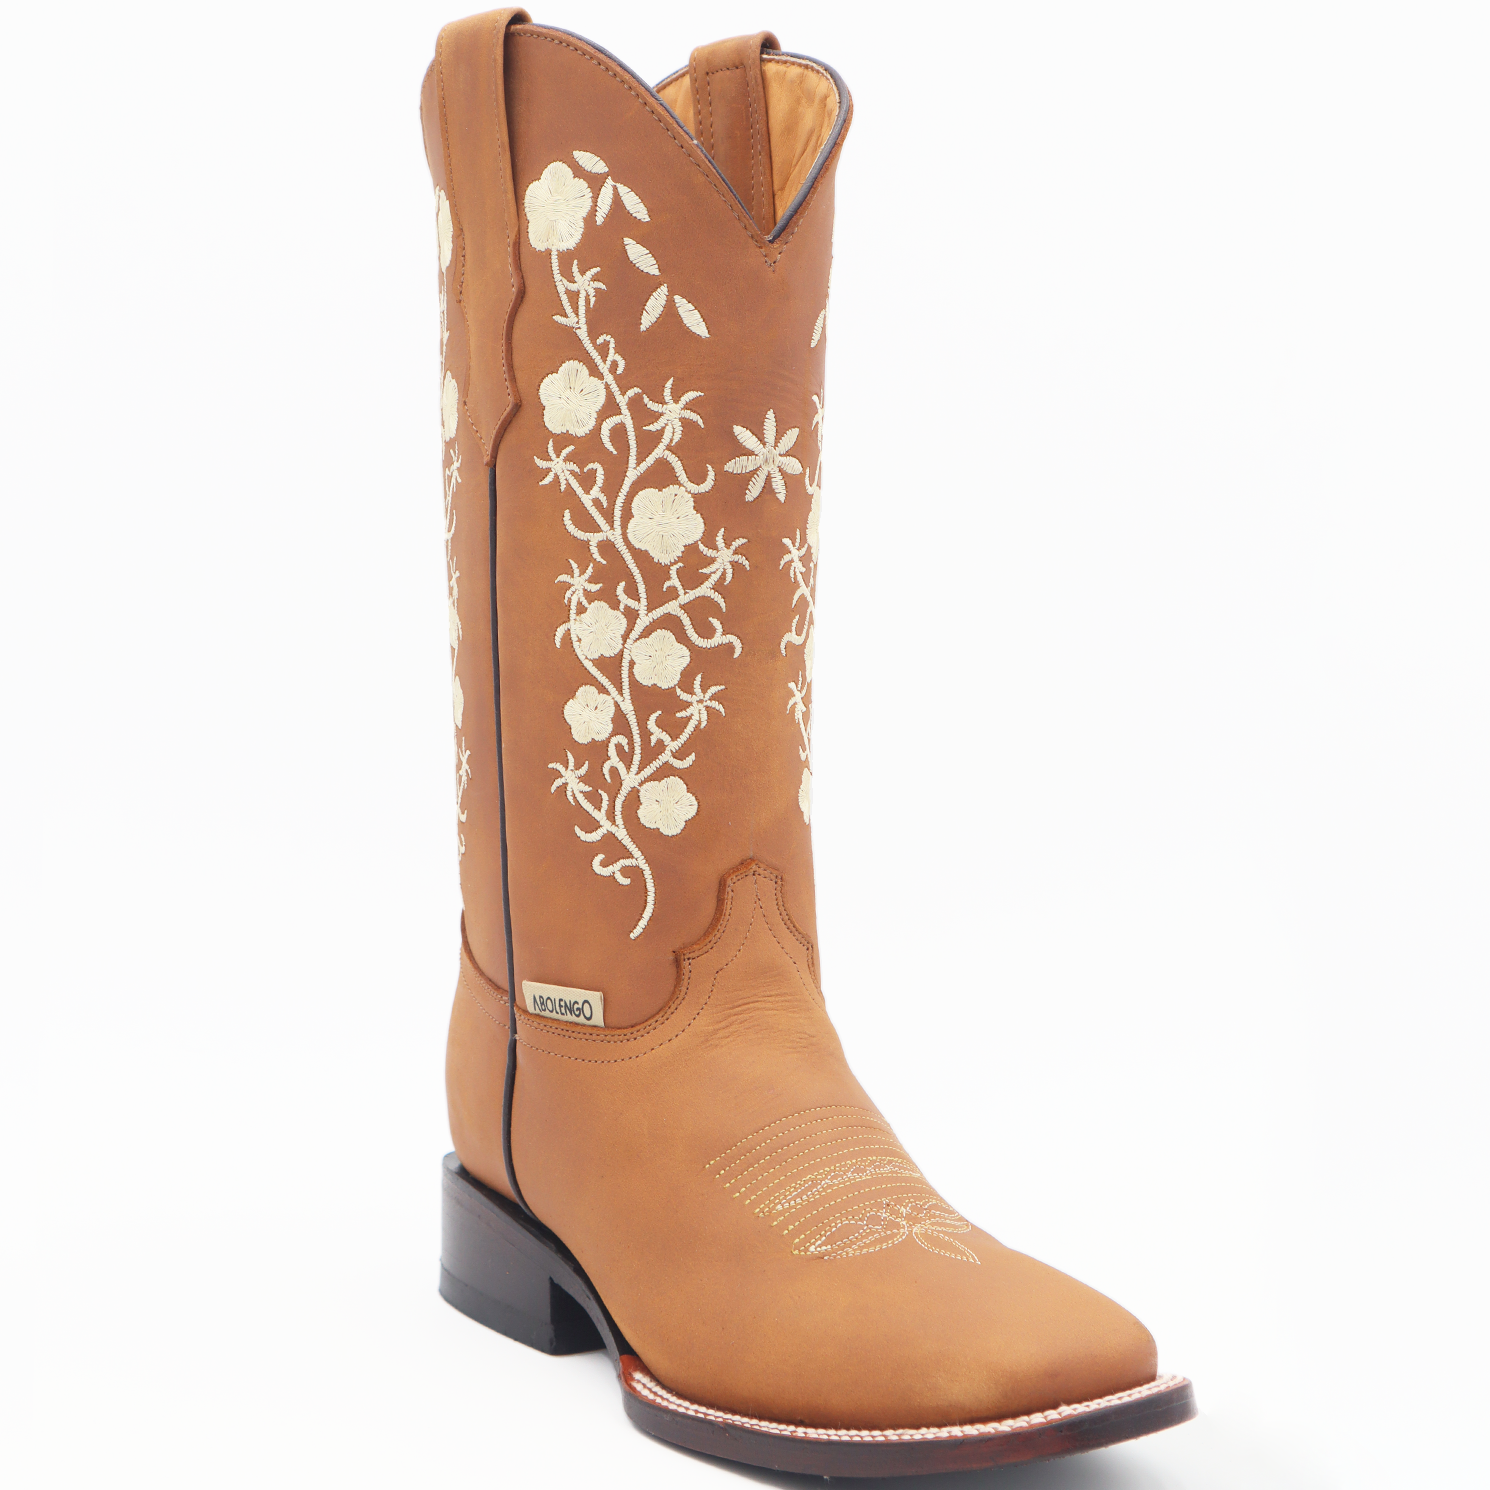 Light brown floral cowgirl boots